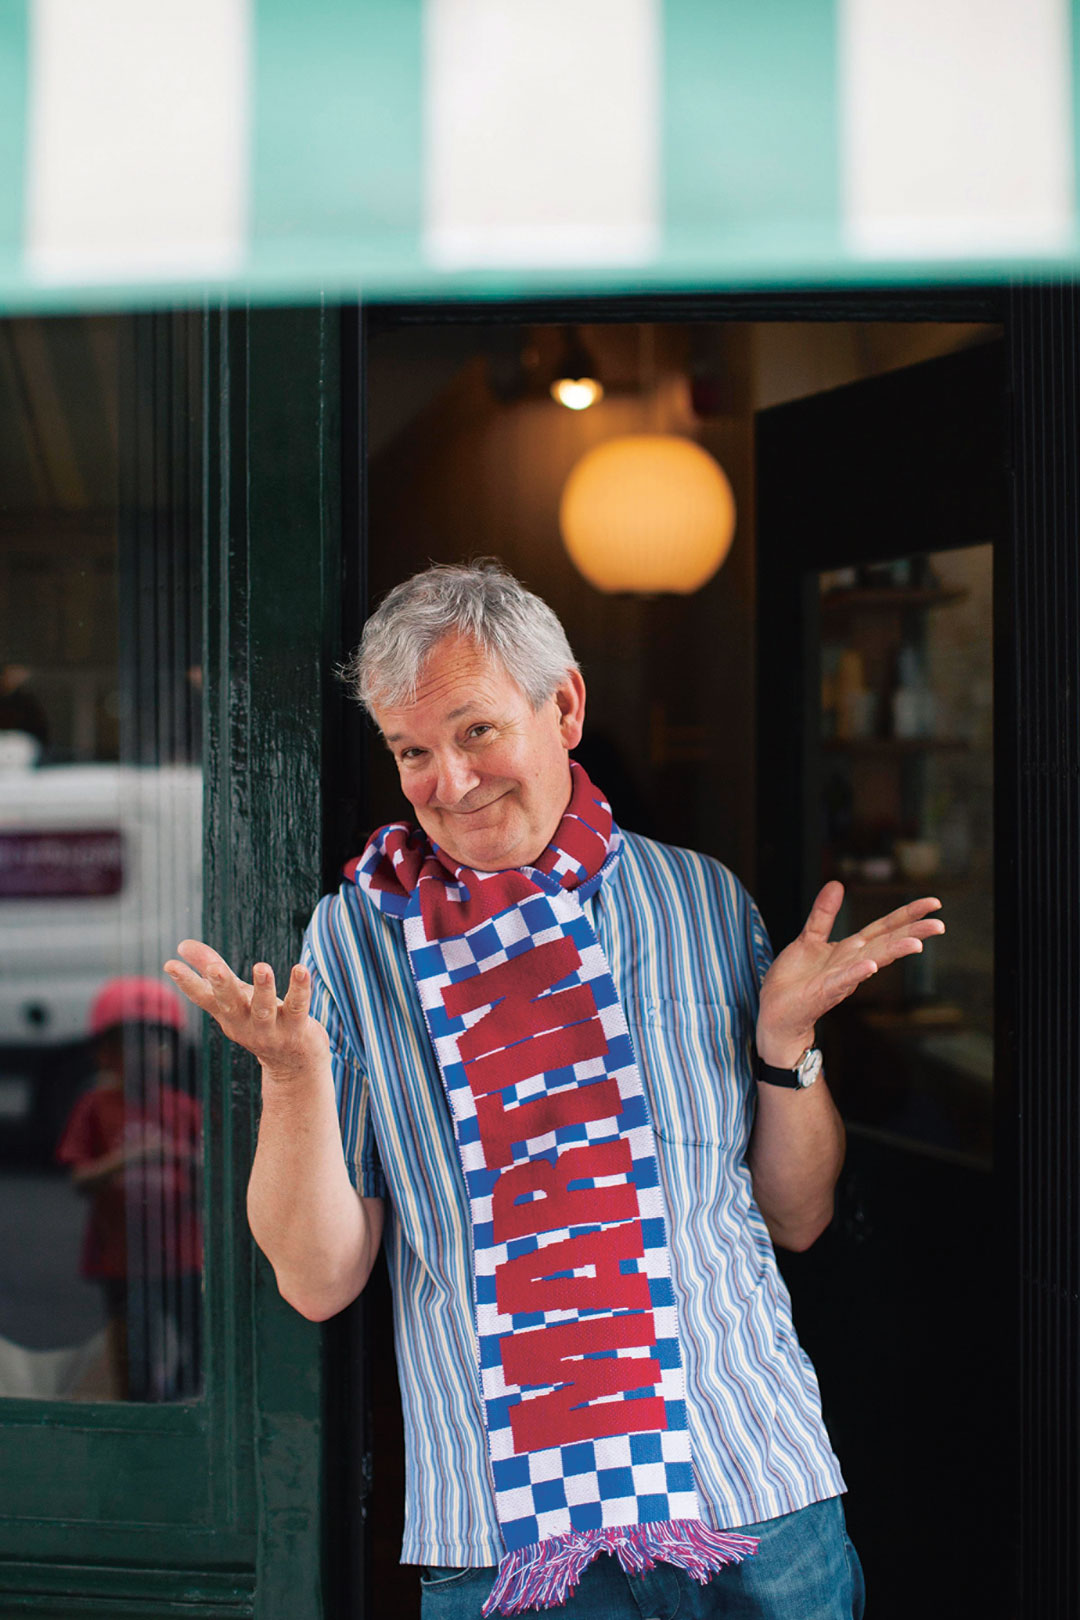 GIFTING: Who is Martin Parr giving his book to this Christmas?